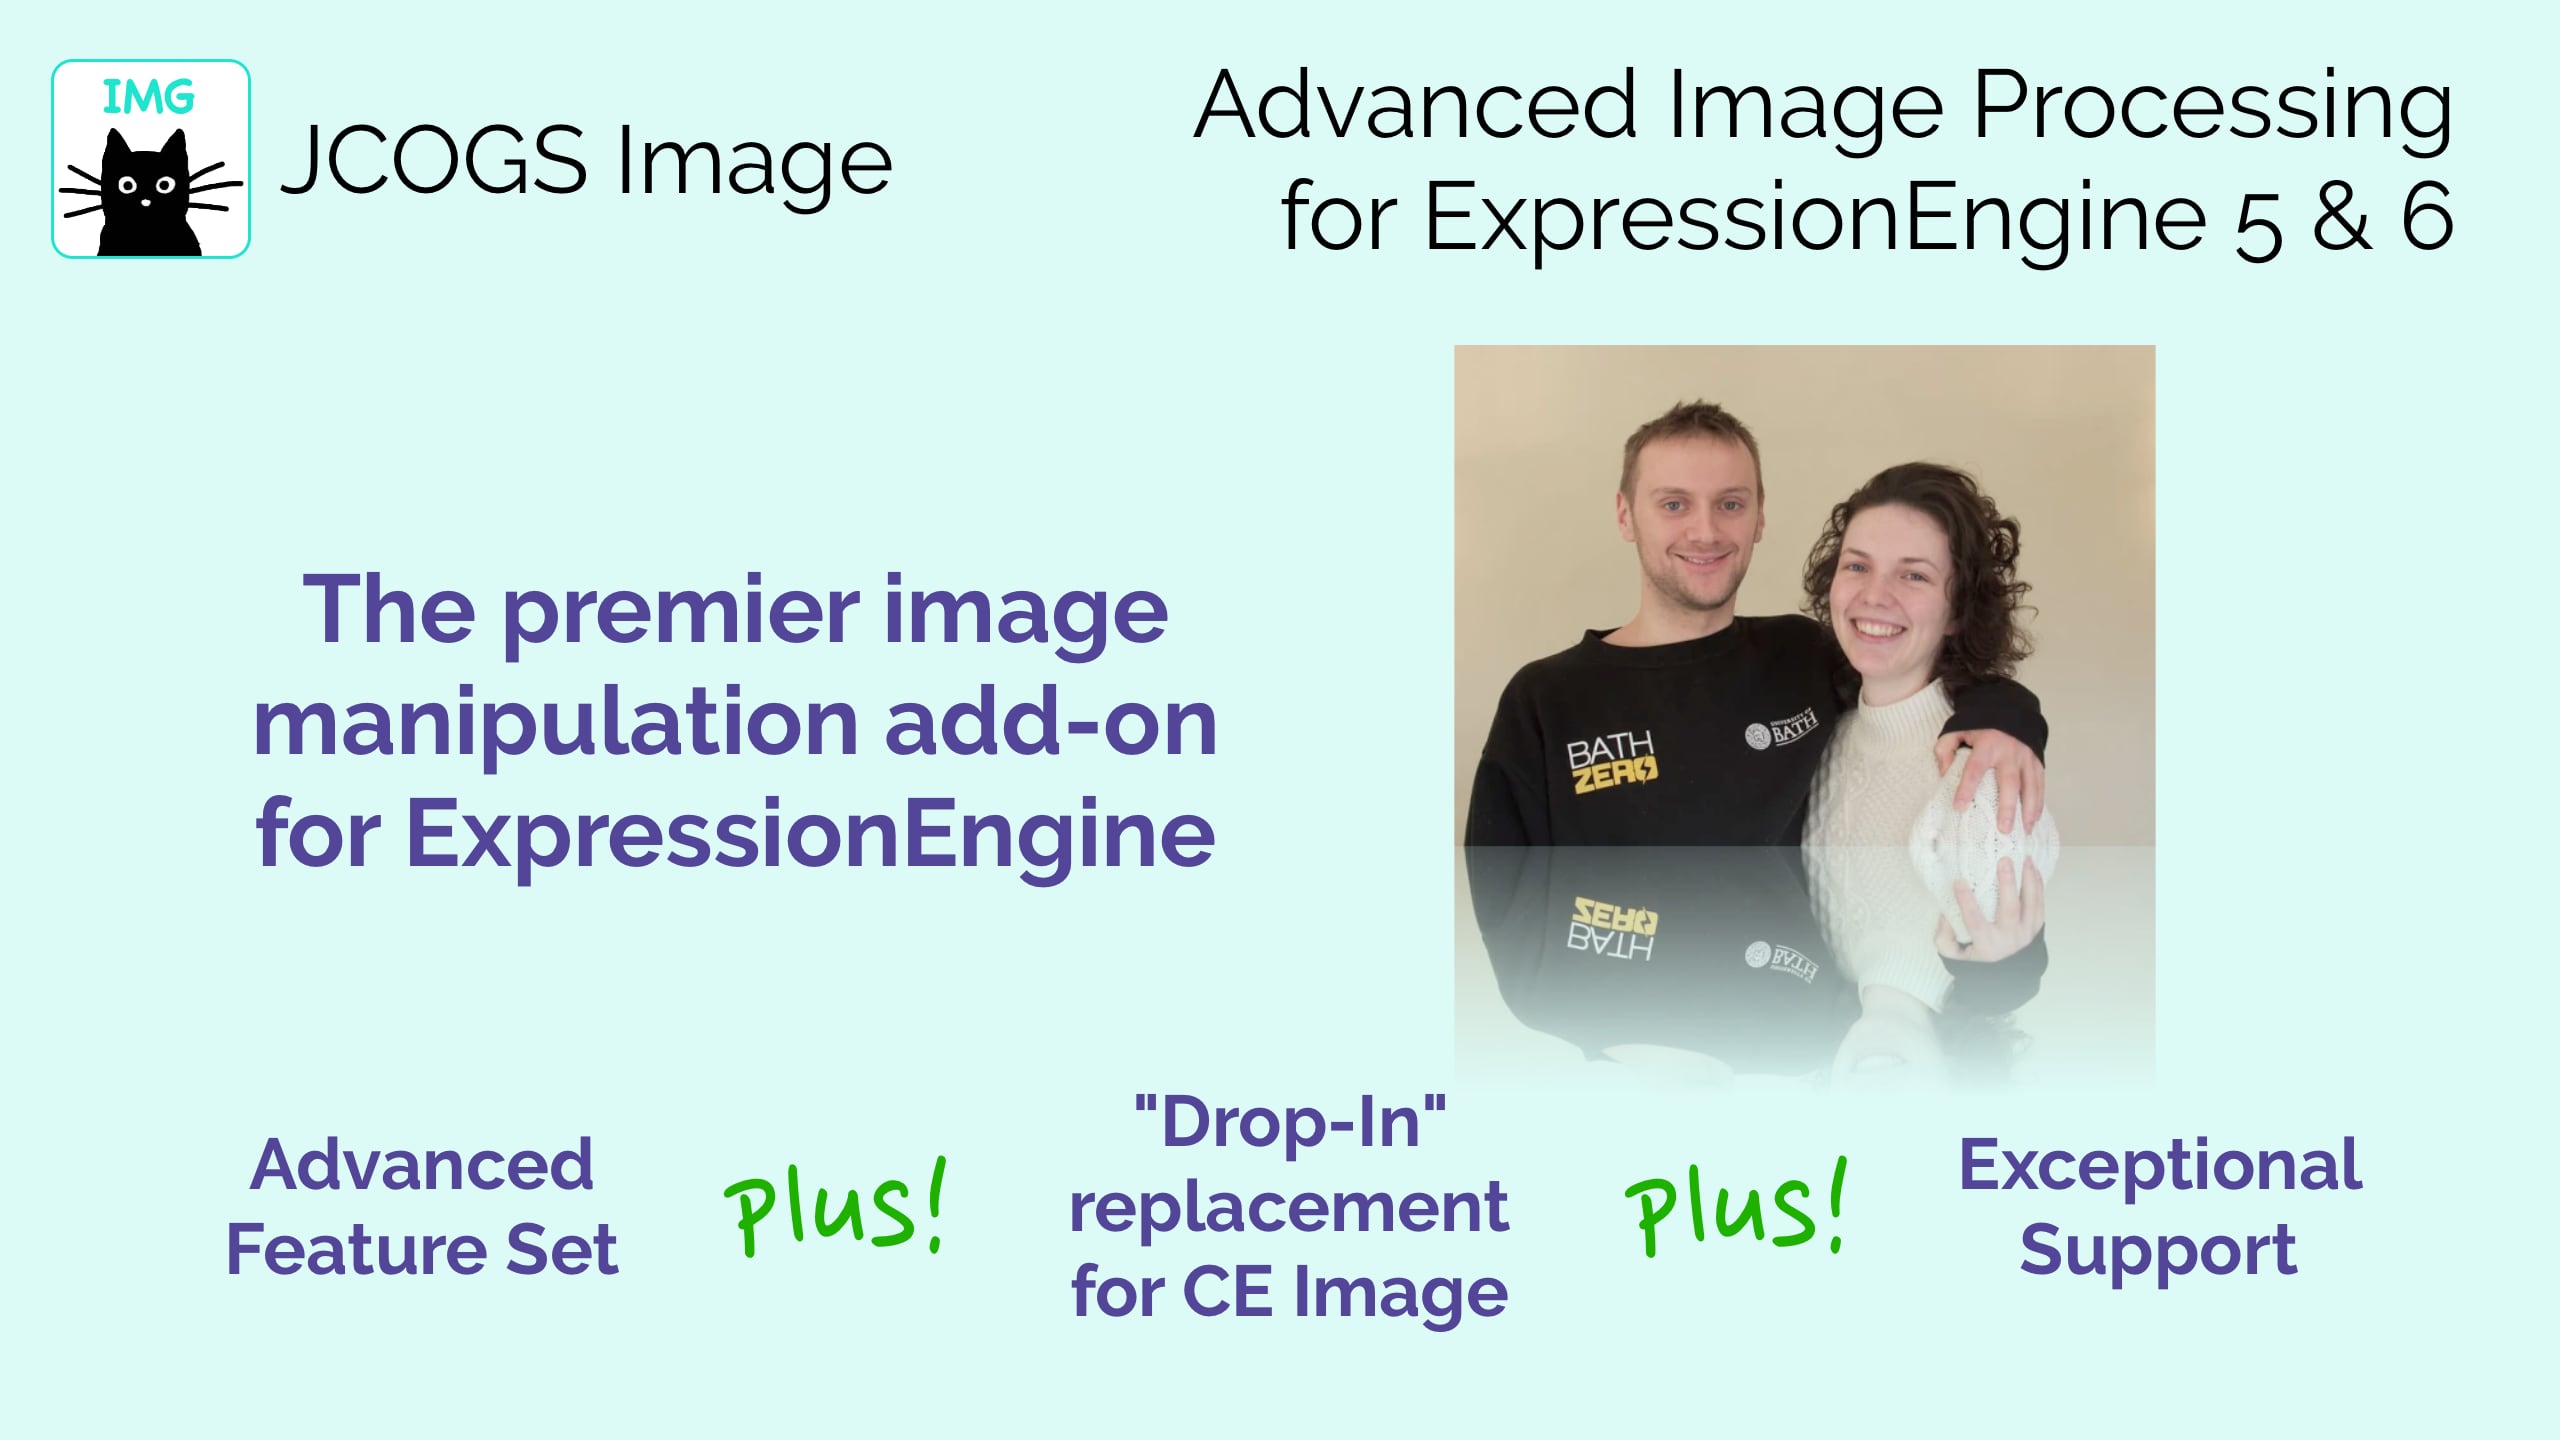 The premier image manipulation add-on for ExpressionEngine